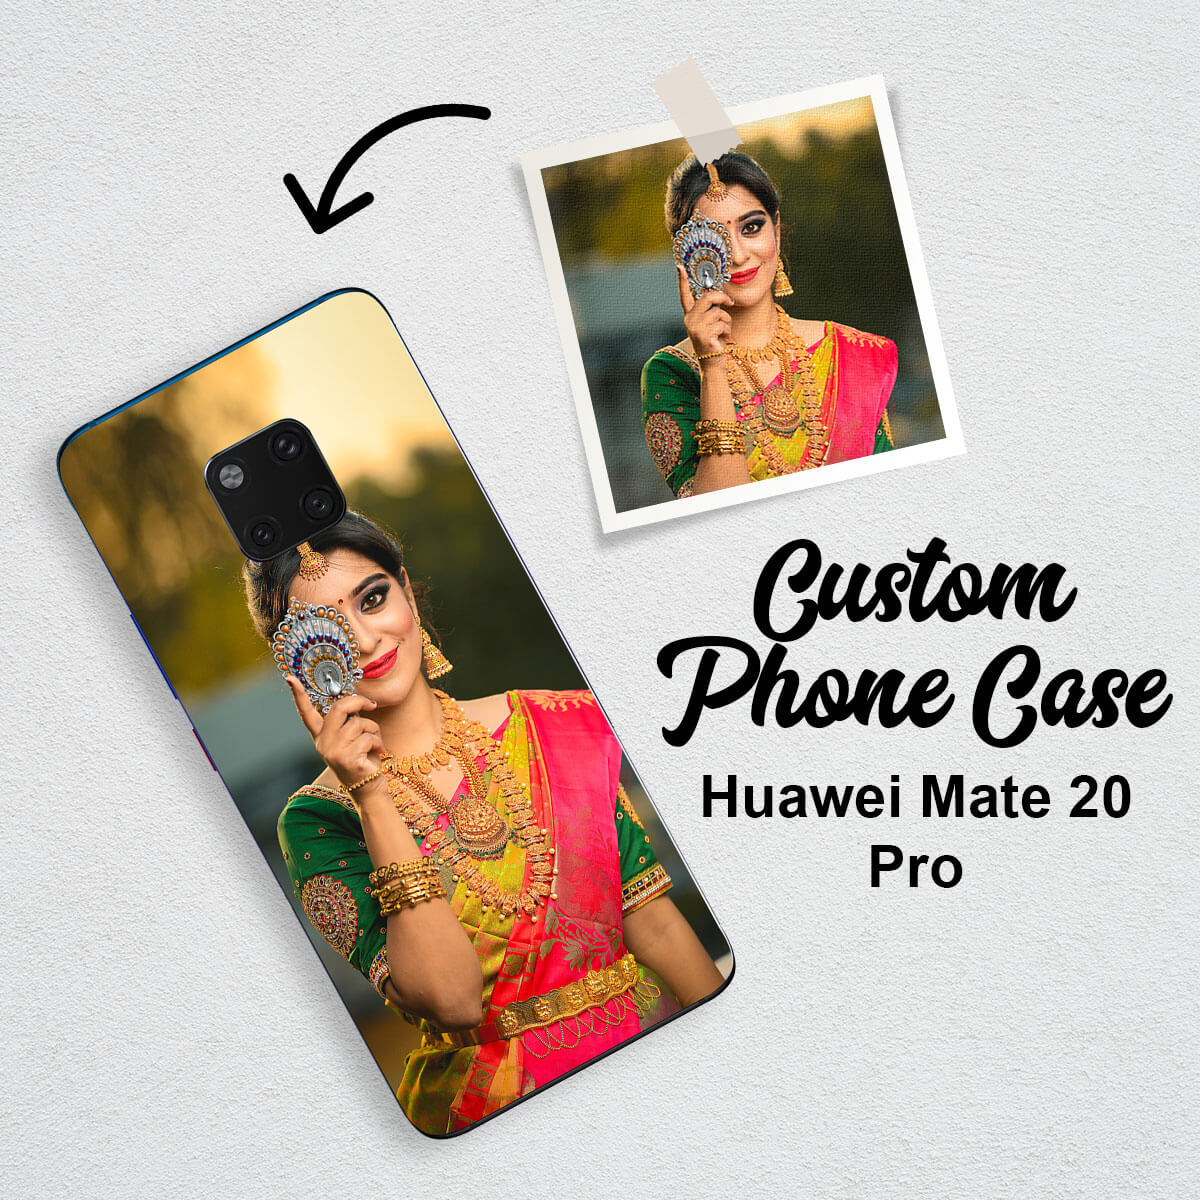 Design Your Own Custom Phone Case For Huawei Mate 10 and Make It Unique